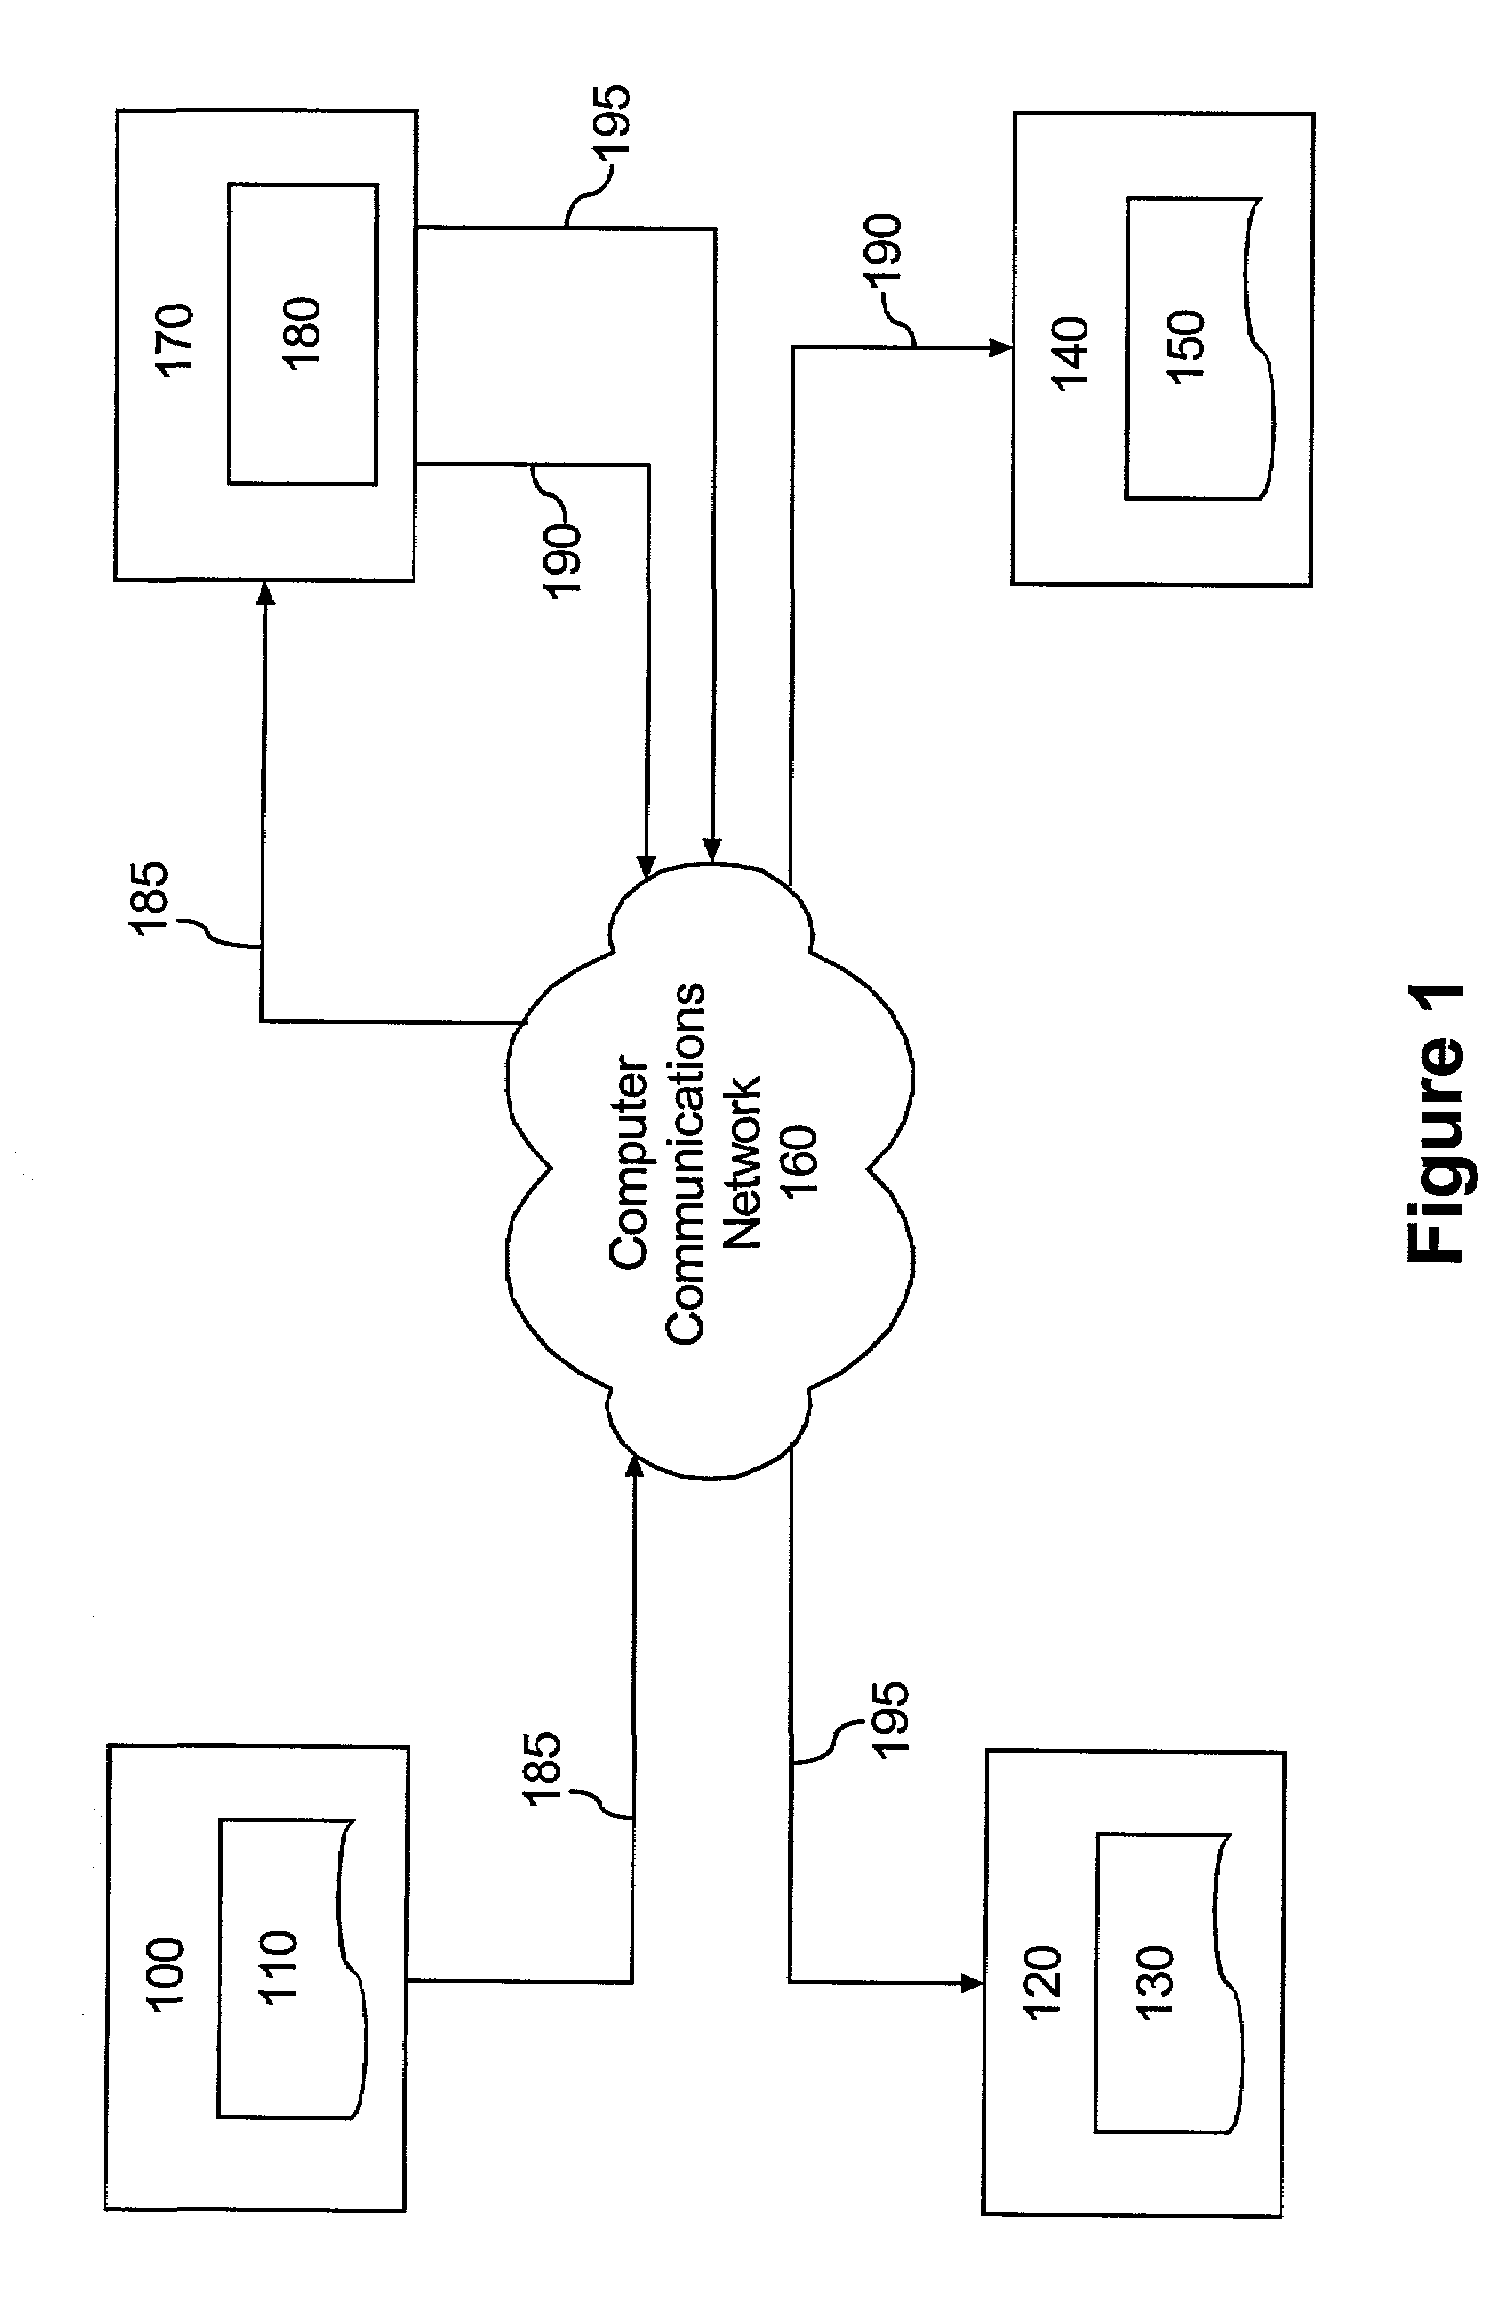 Method and system for routing data repository messages between computing devices